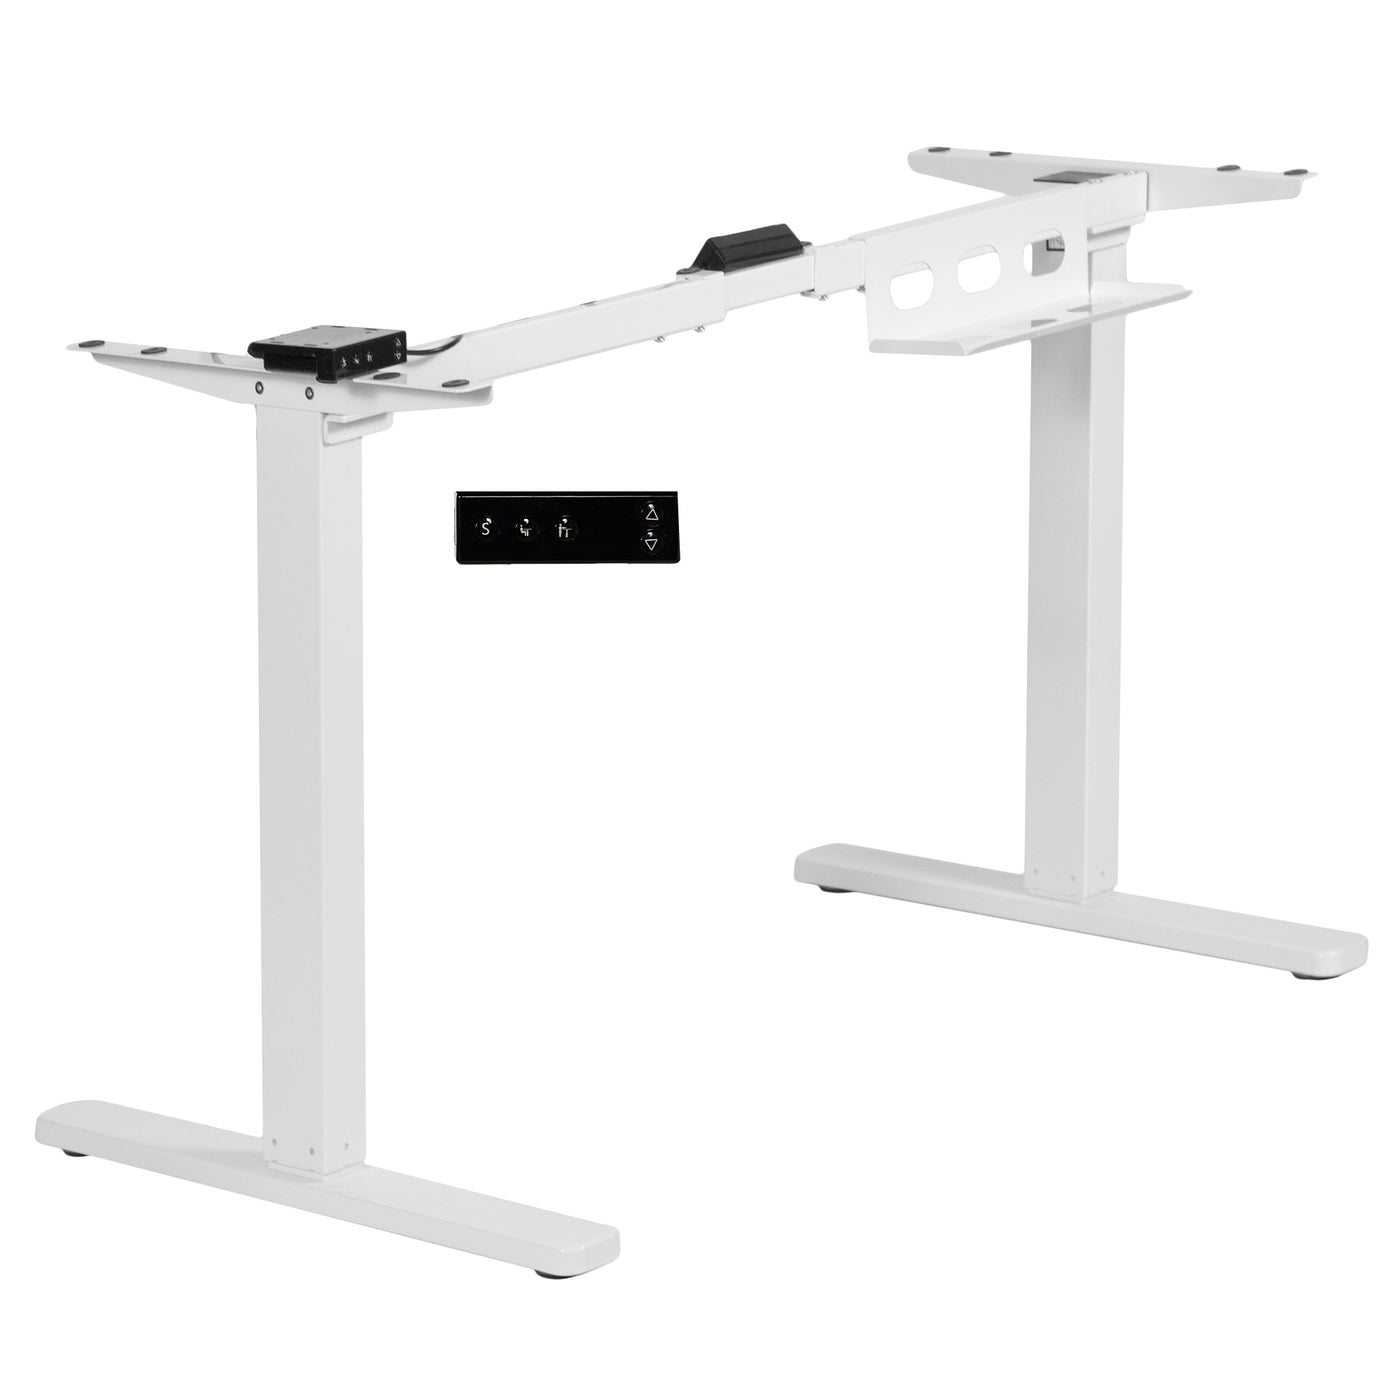 Heavy-duty sit or stand desk frame with adjustable height.